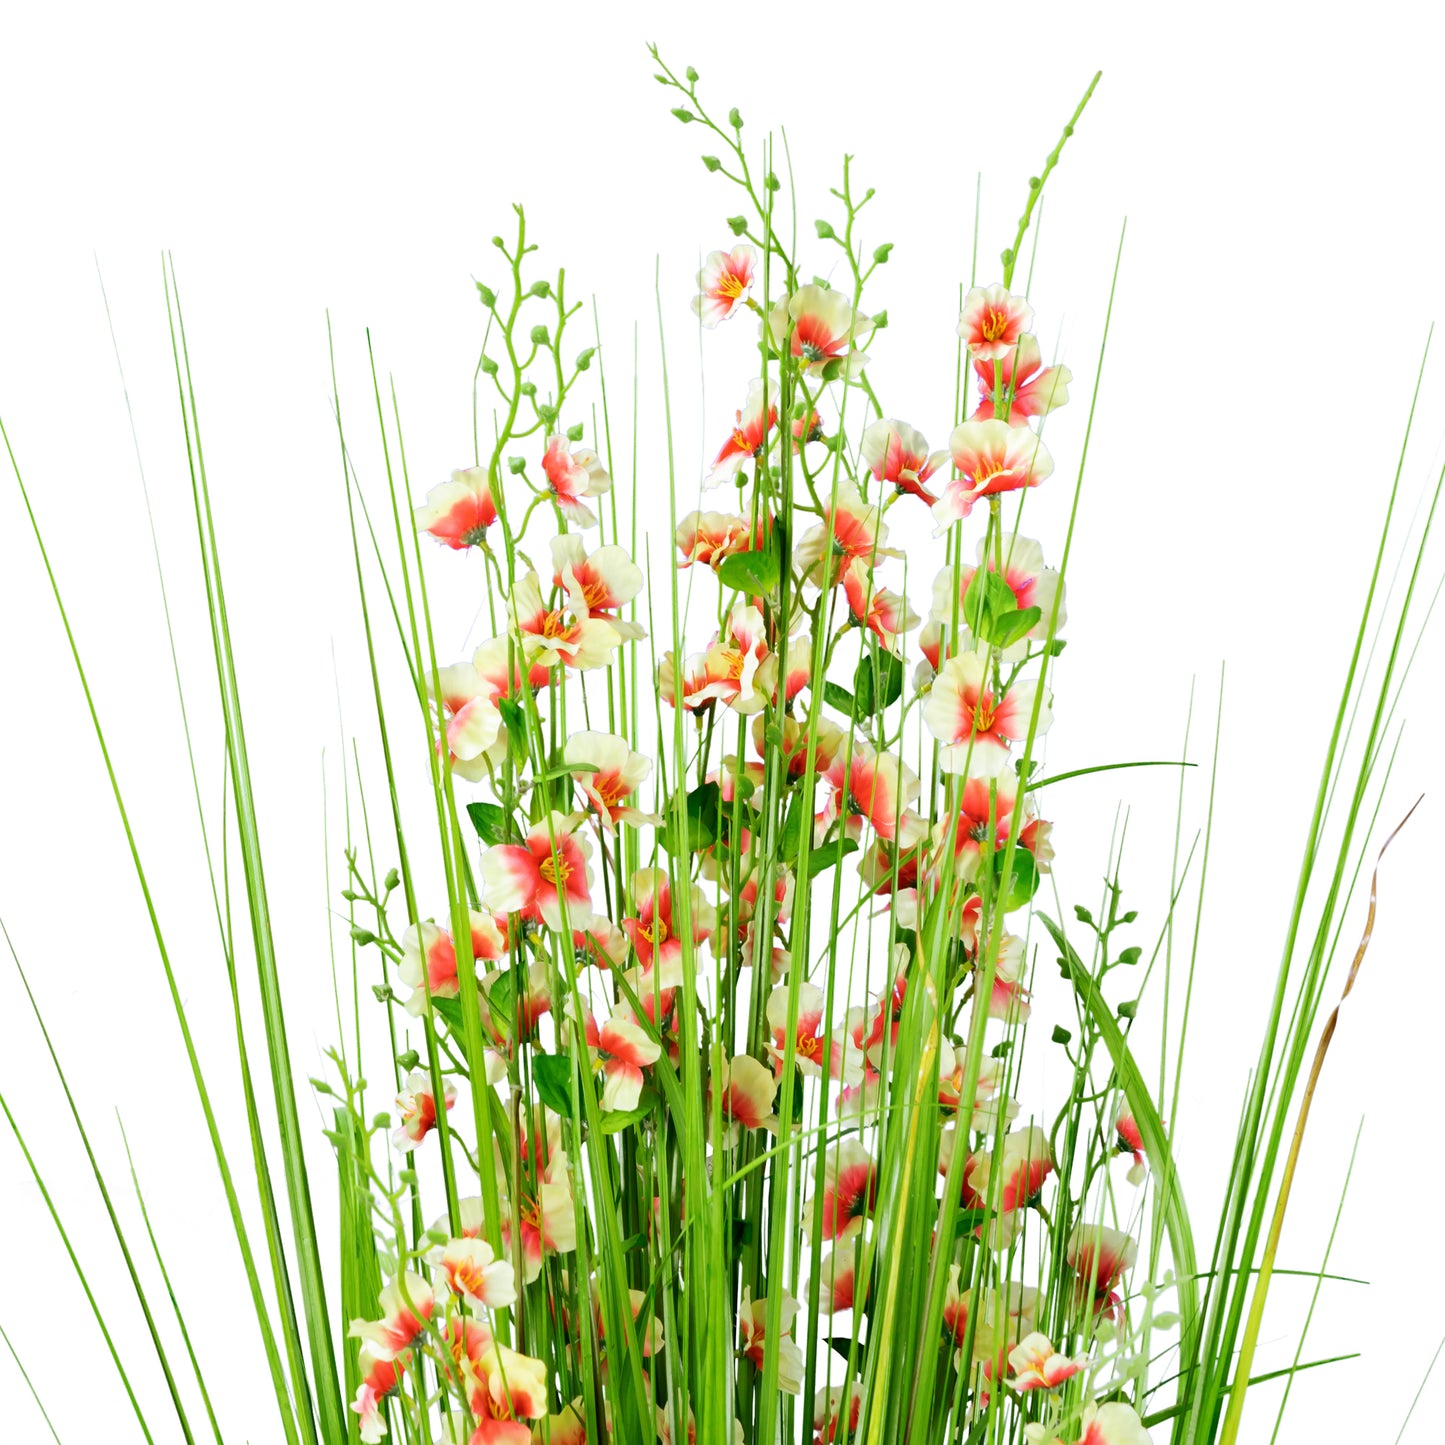 5 Feet High Artificial Reed with Decorative Yellow and Pink Flowers